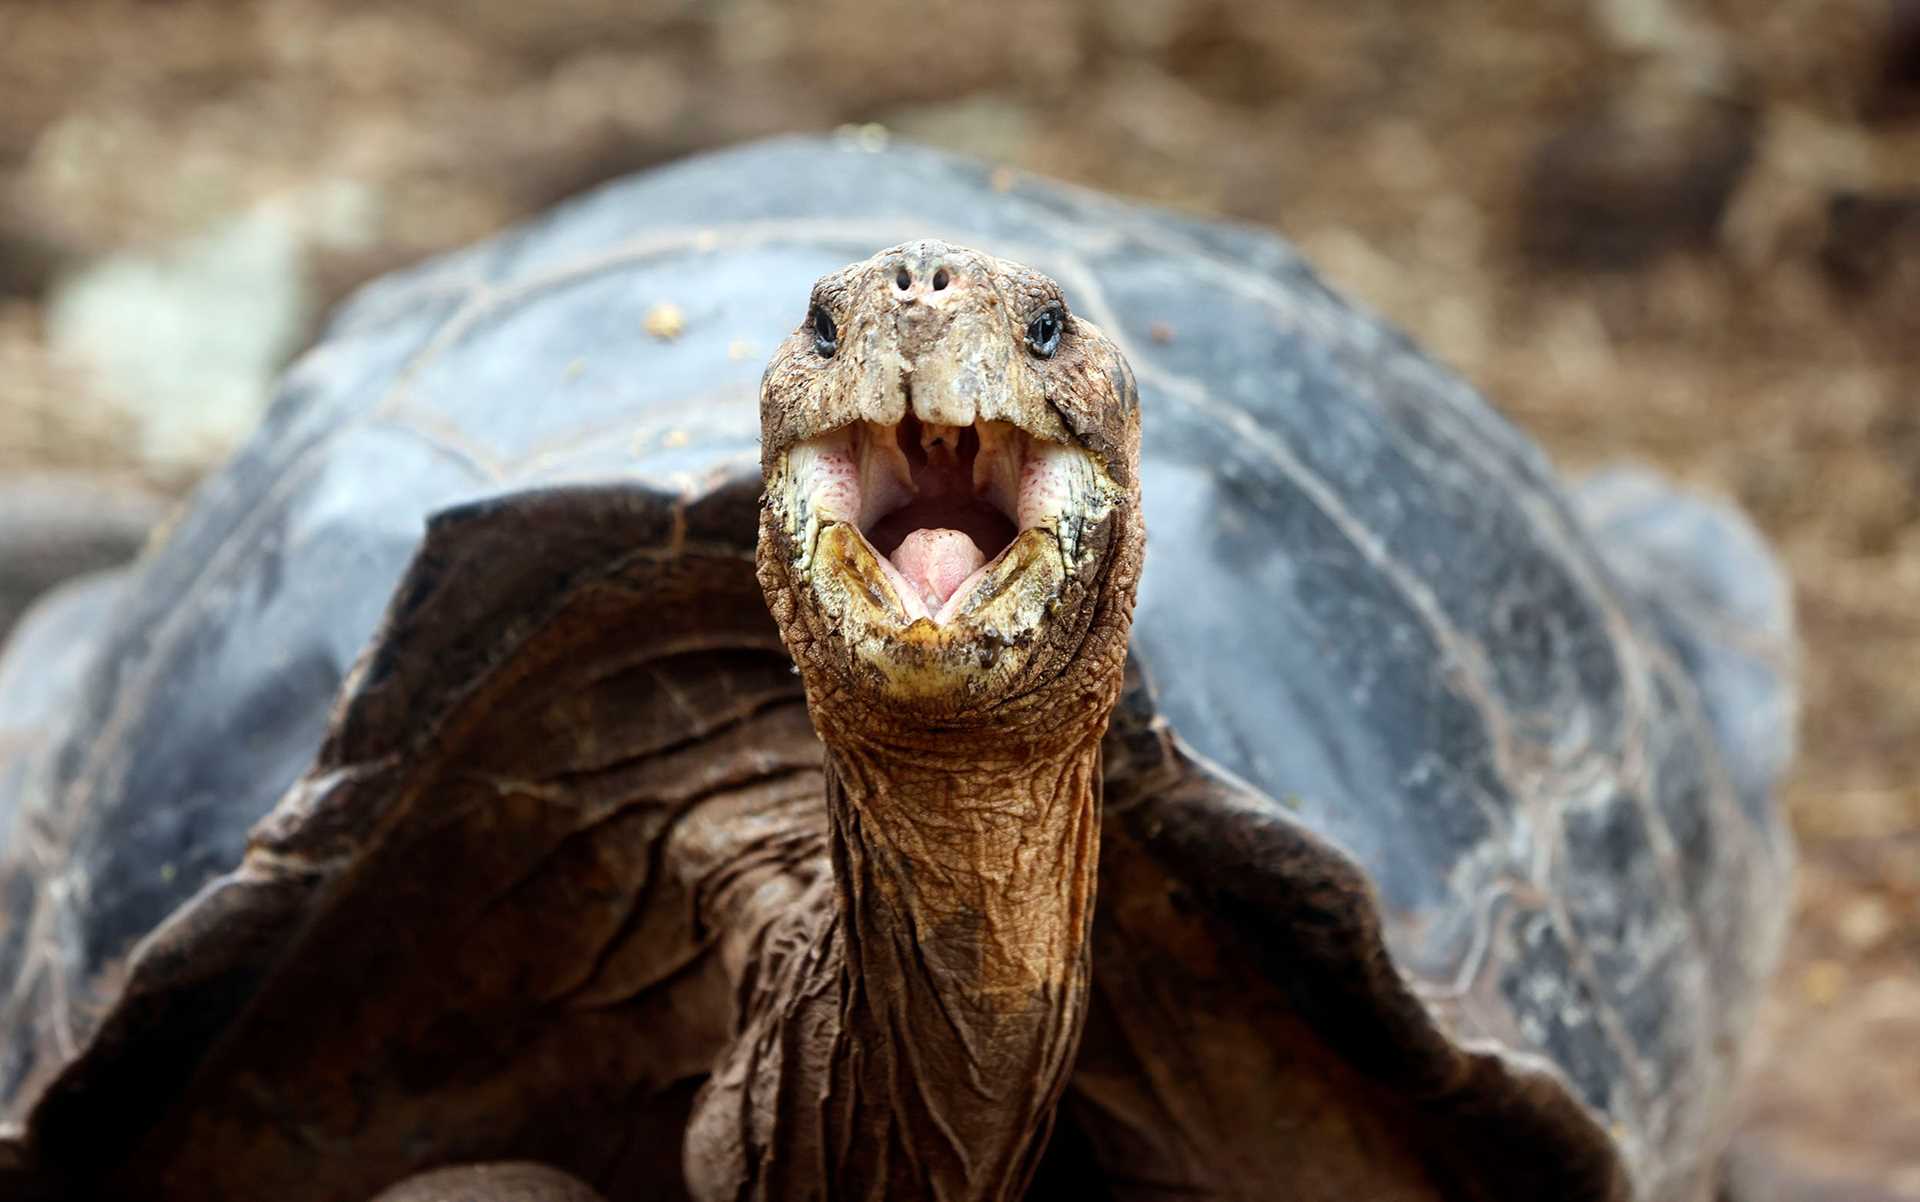 a tortoise faces the camera with its mouth open